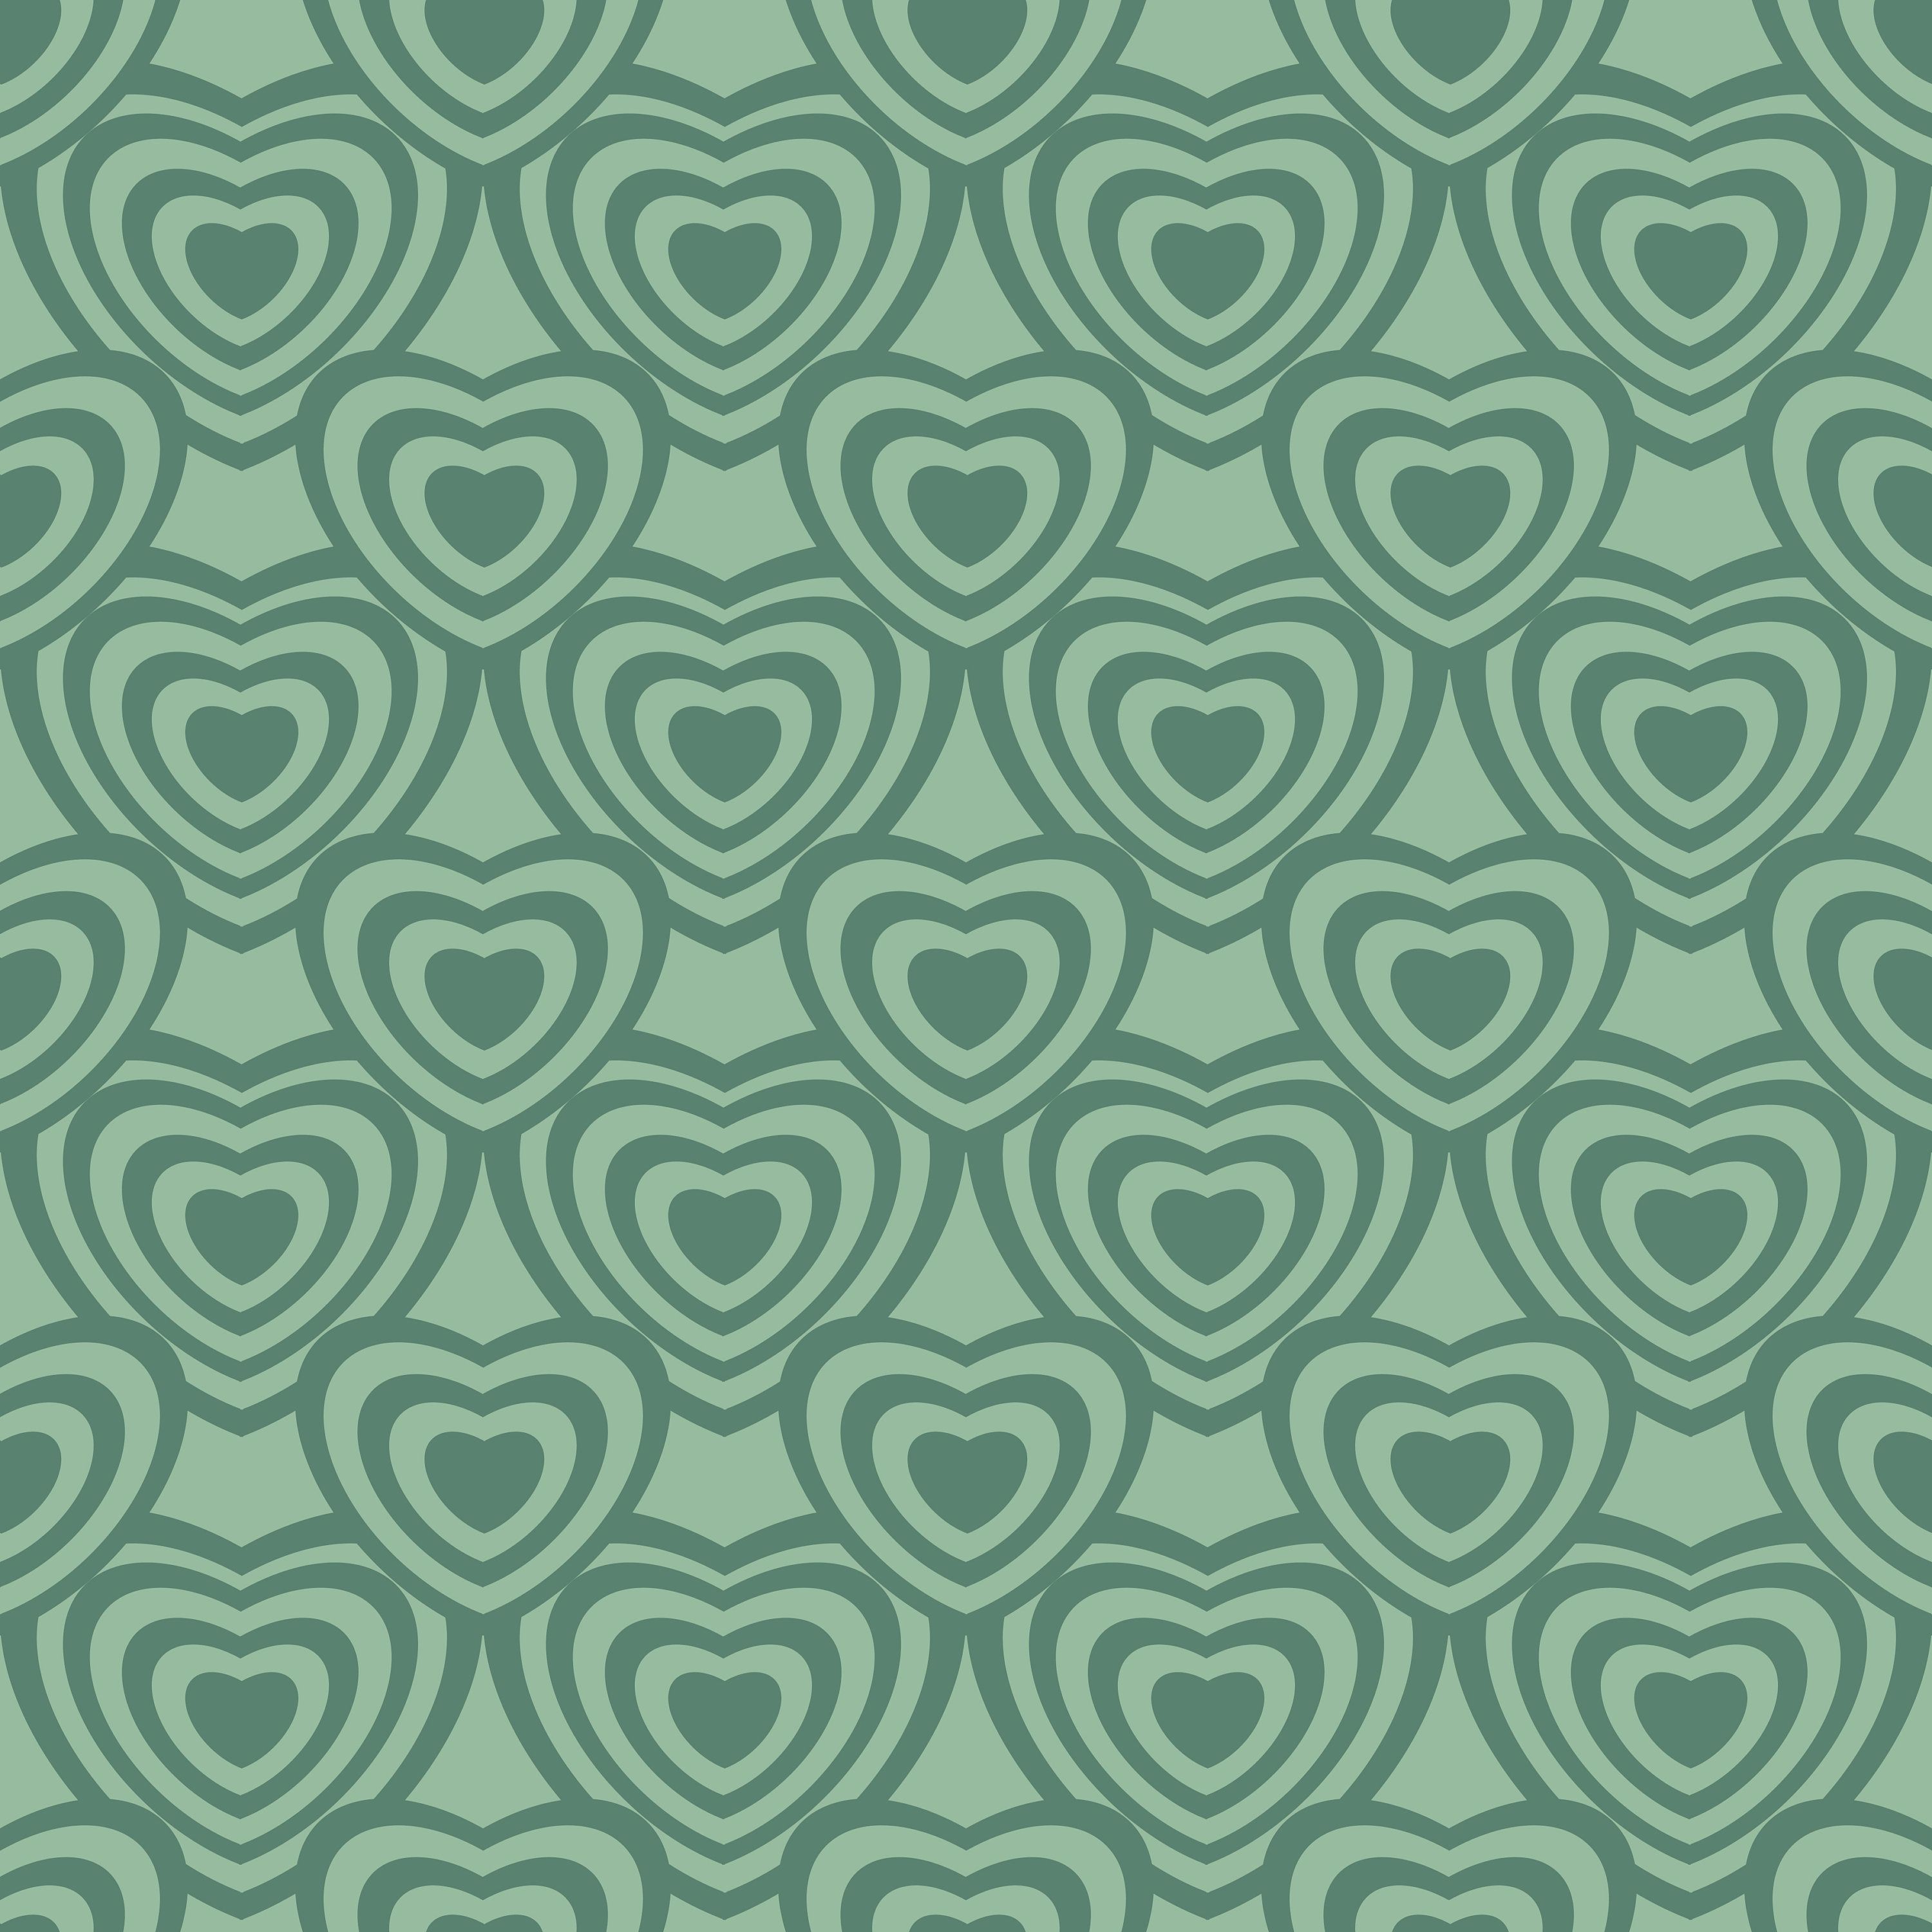 Y2k Heart 2000s Trend Sage Seamless Repeat Pattern